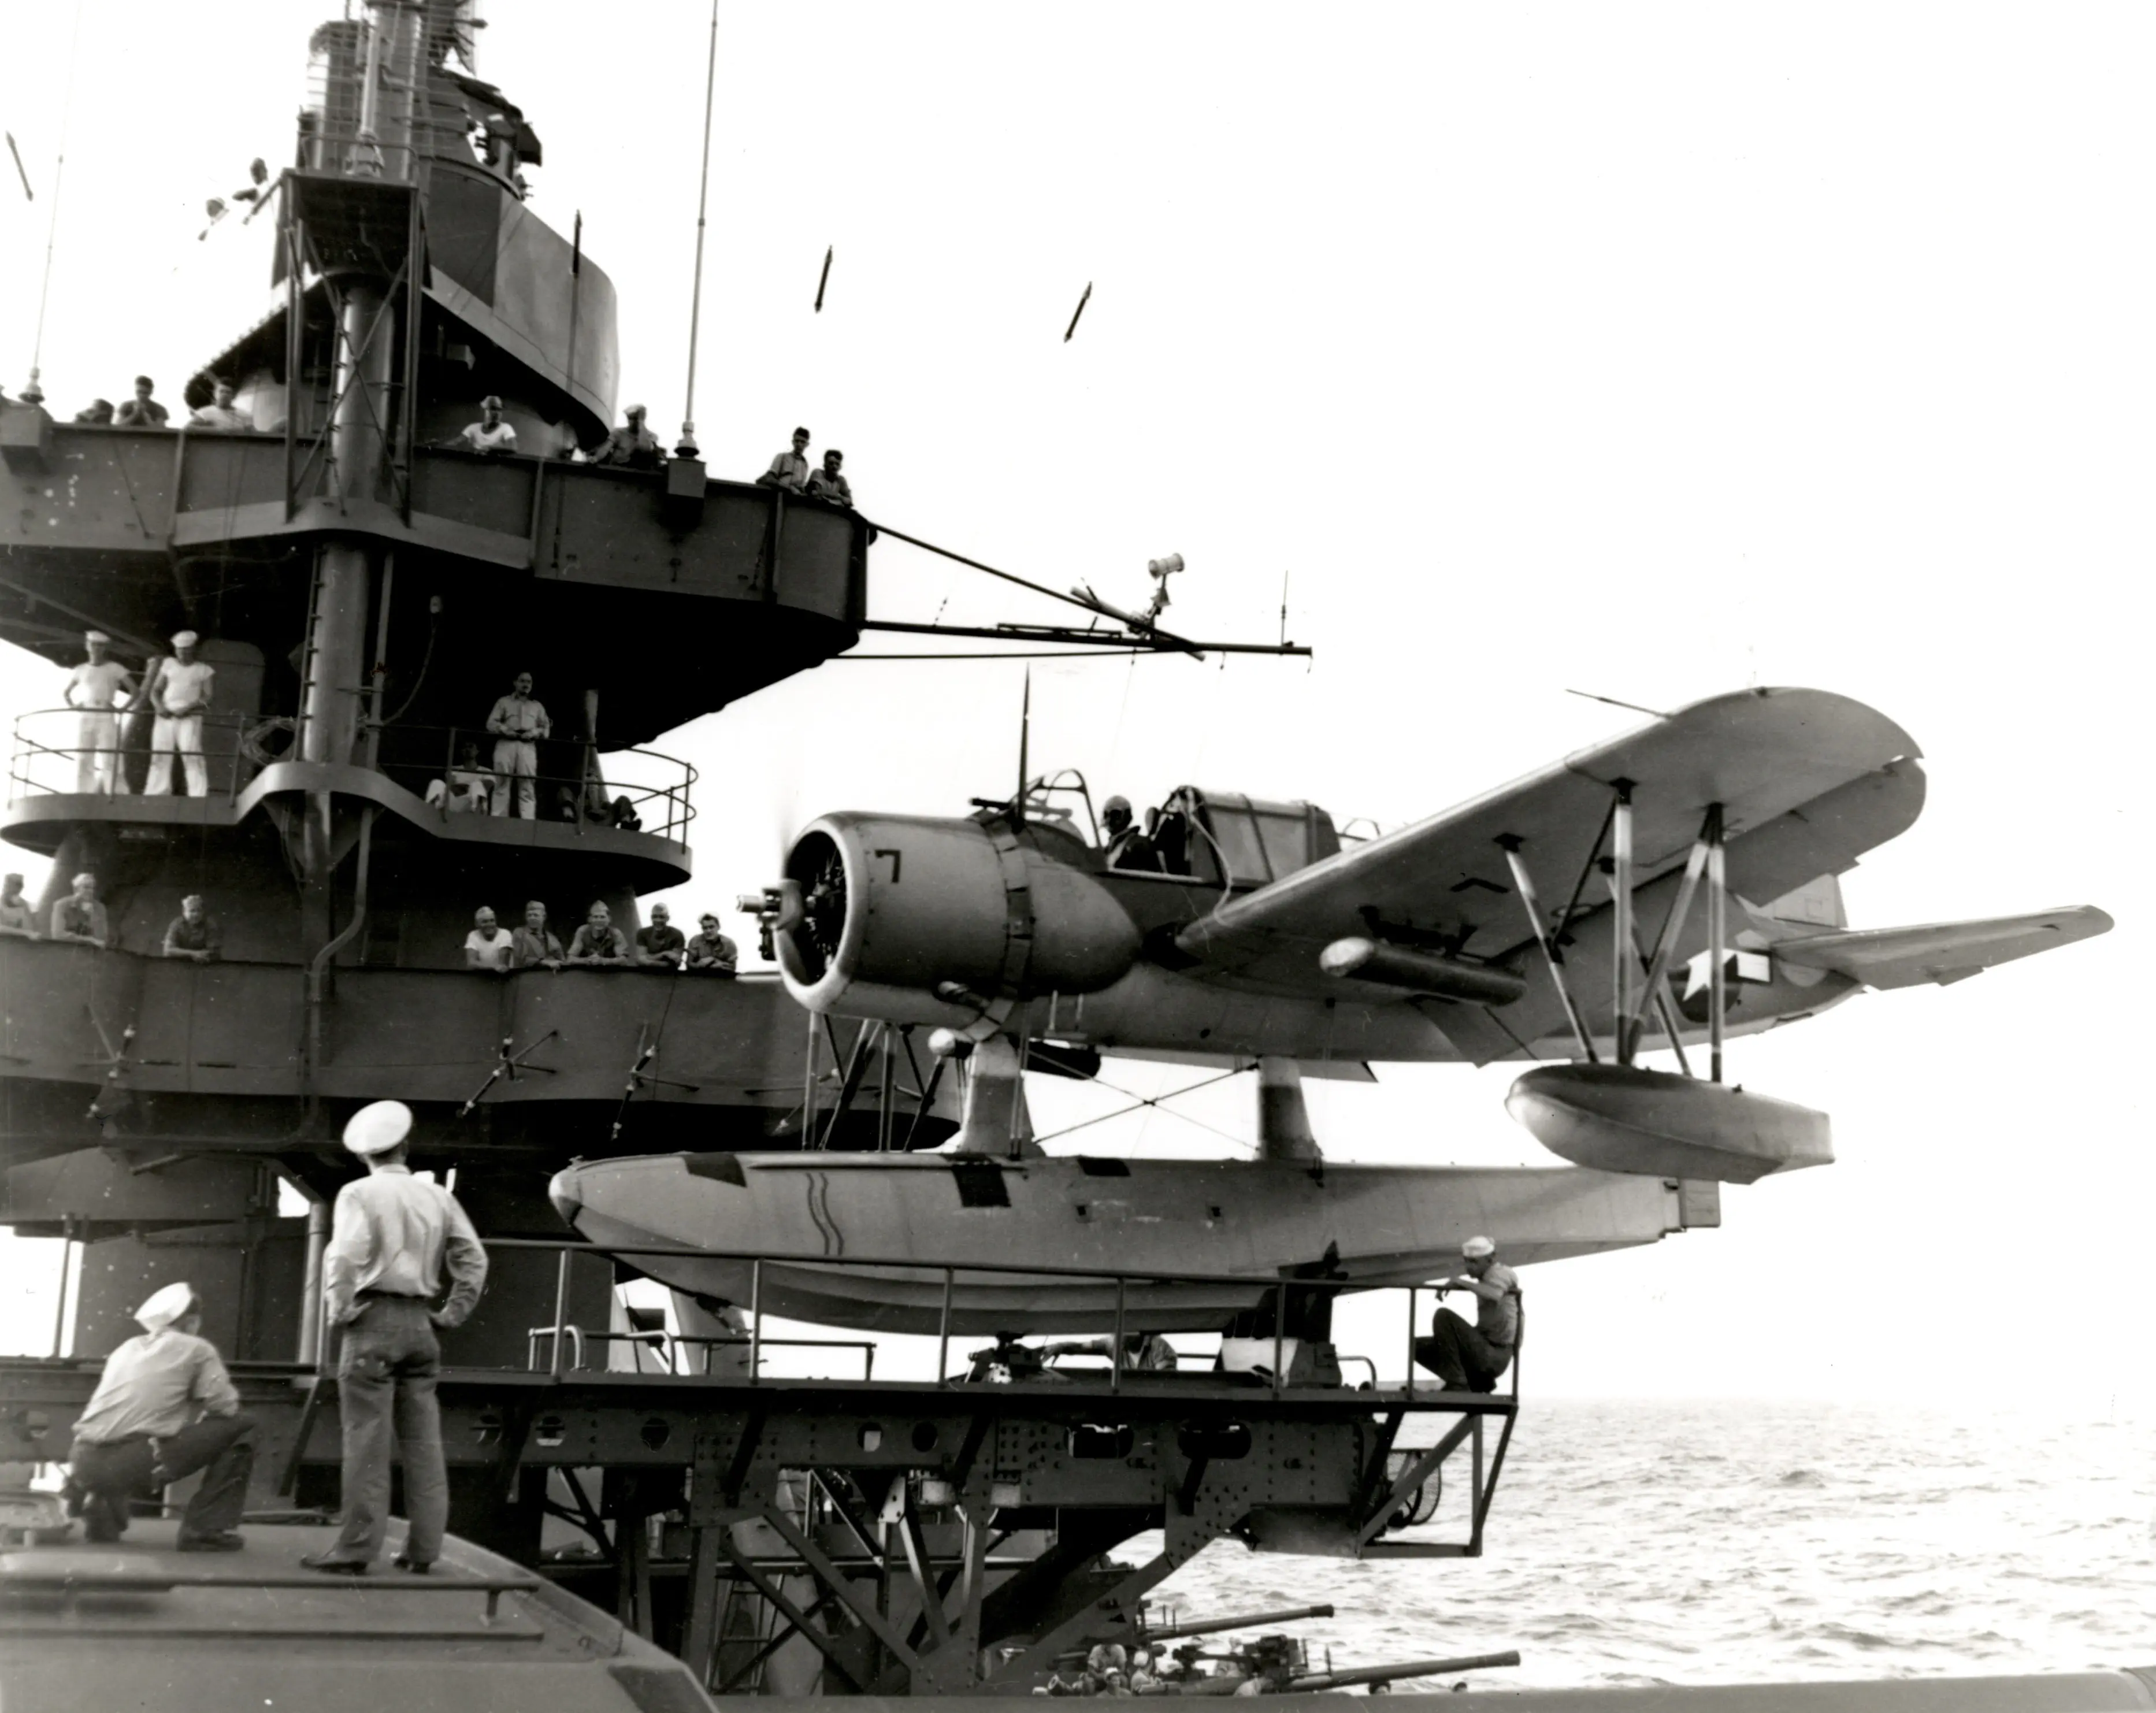 A black and white photograph of a plane sitting on a riveted steel framework. The plane has a large float directly under it, slightly larger than the body of the plane, with two more floats attached to the wings. The framework it rests on is the aircraft catapult on Battleship Texas, with numerous sailors and officers looking on from the main mast and the top of the turret.